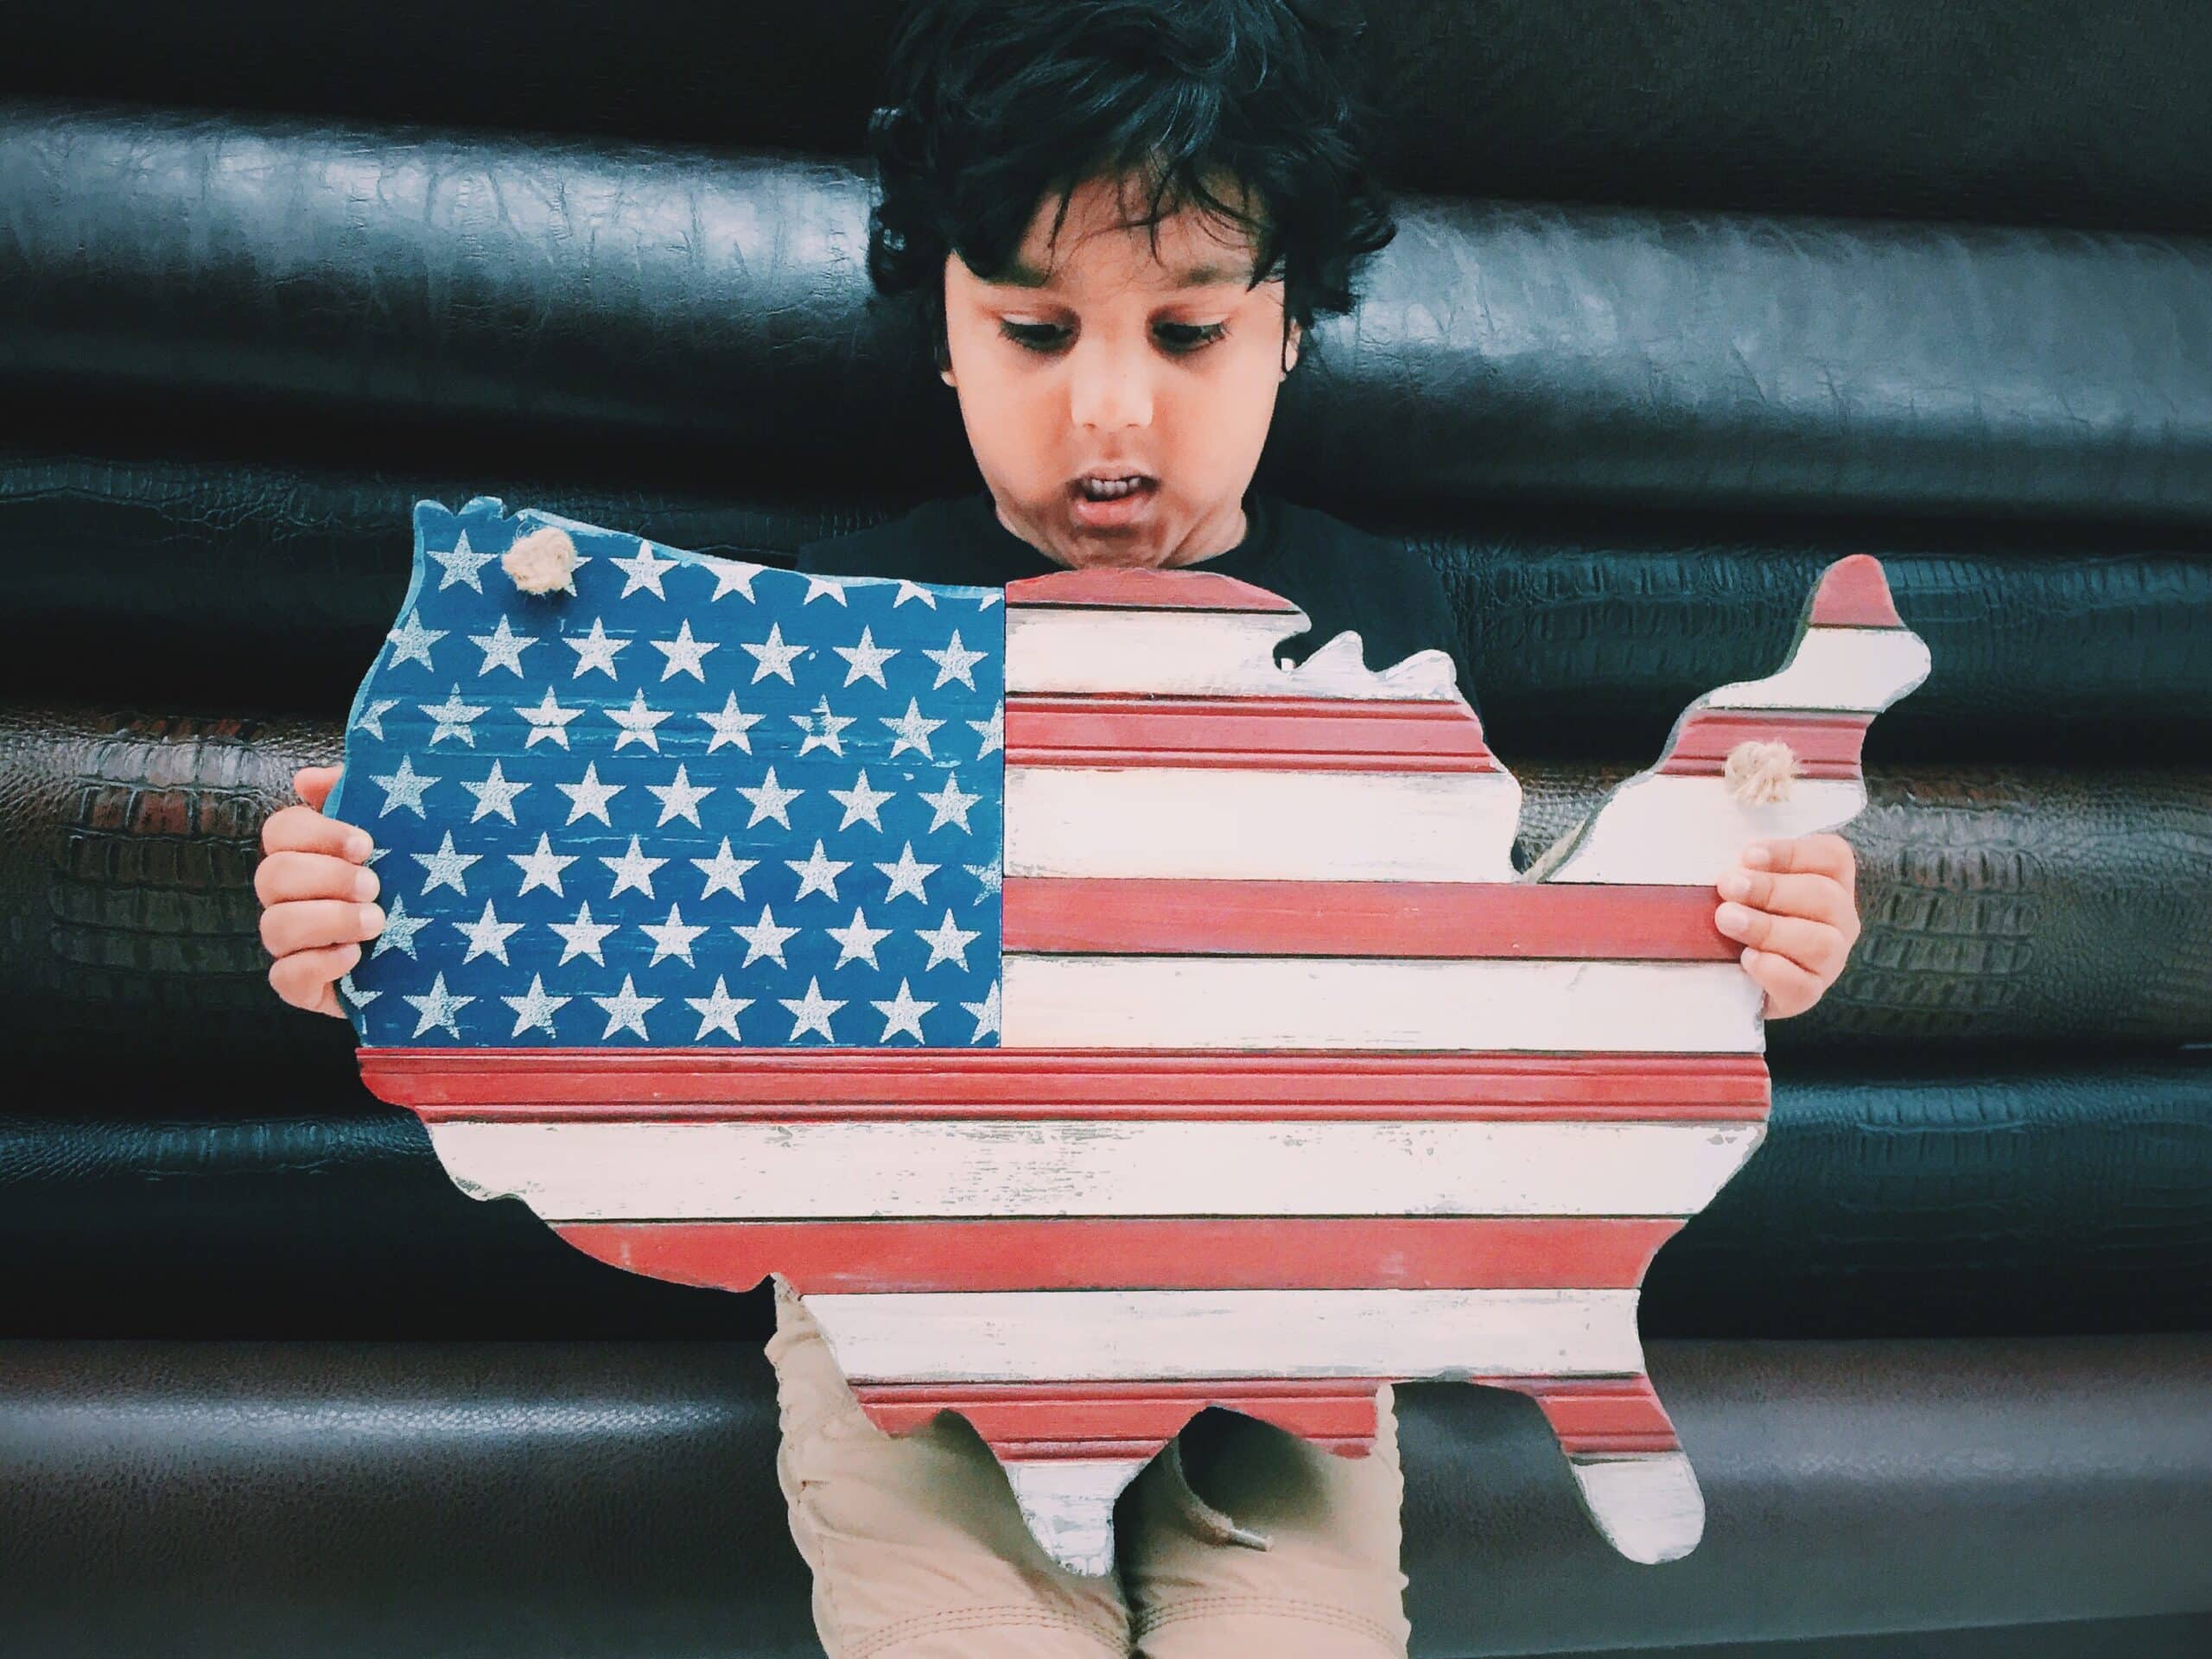 How to calculate cost of living: boy holding a wooden outline of the US